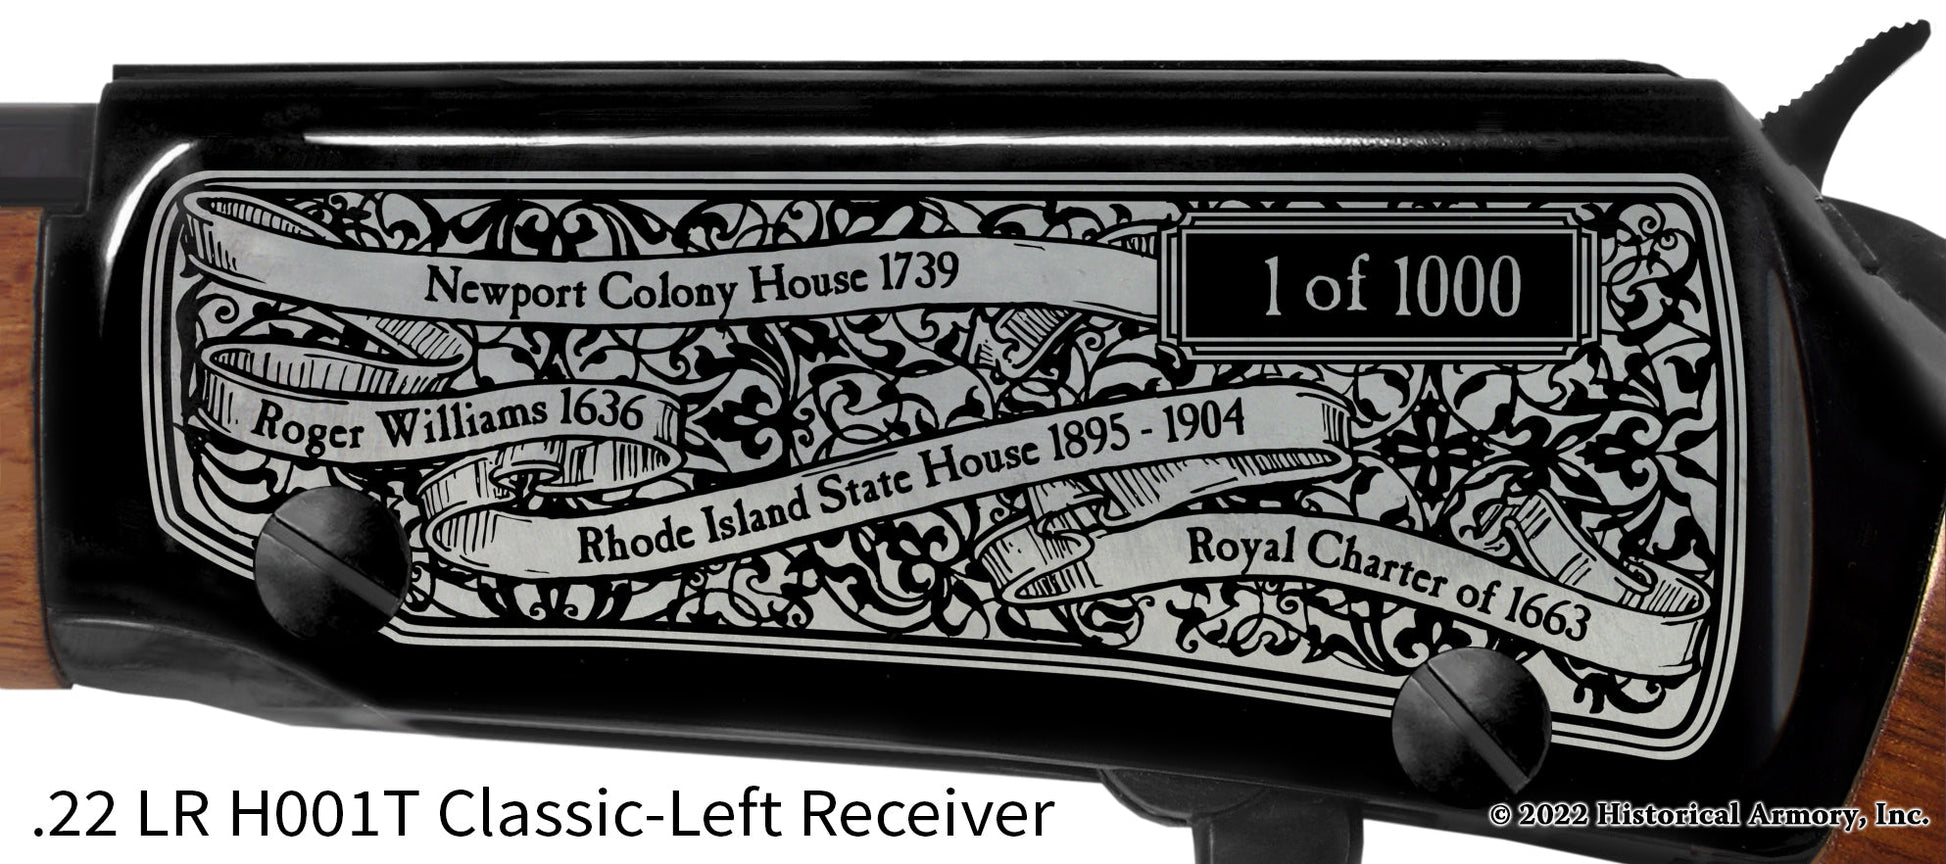 Rhode Island State Pride Engraved H00T Receiver detail Henry Rifle